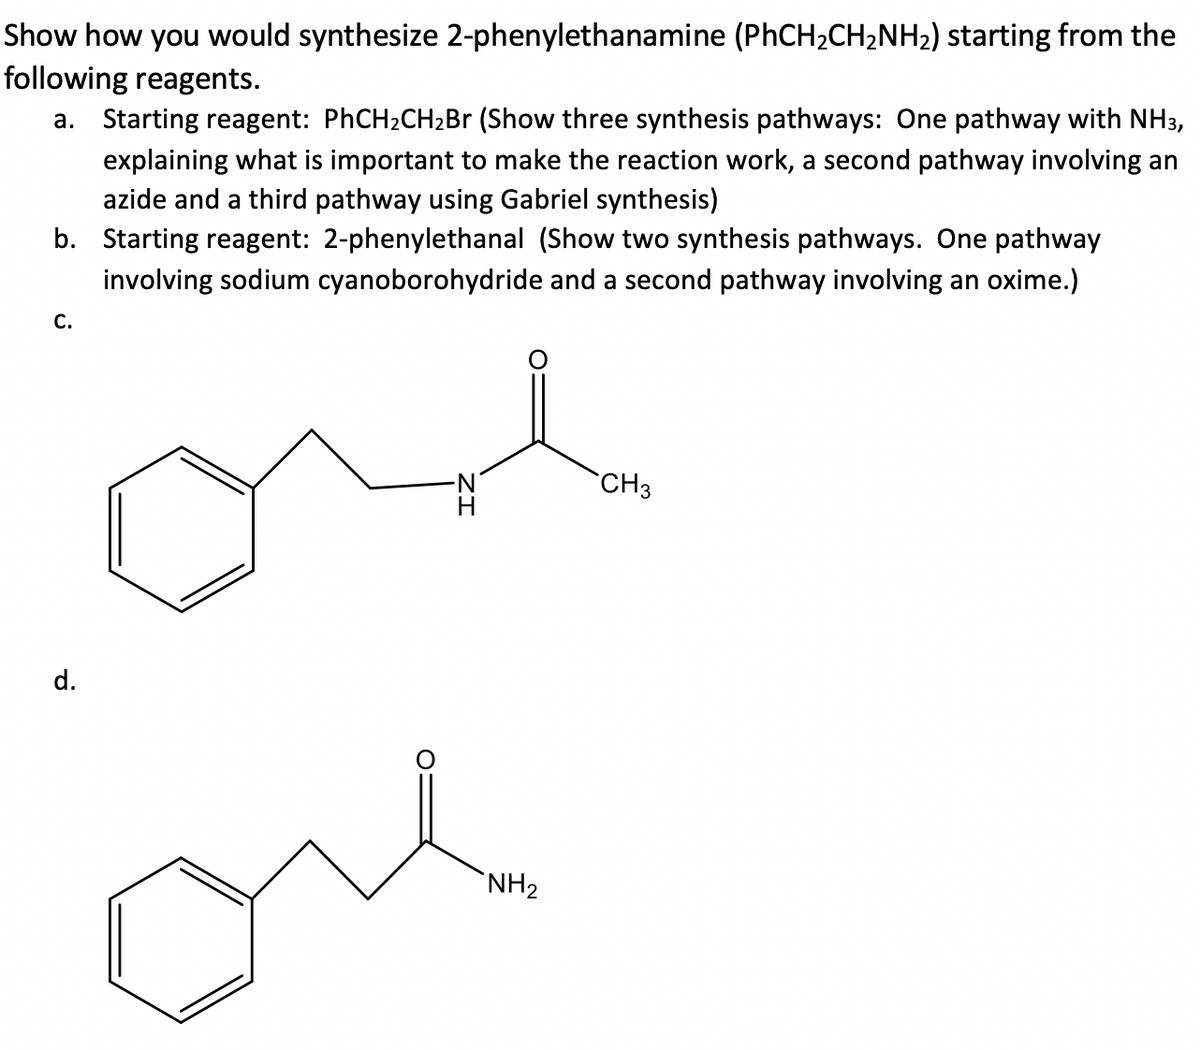 Show how you would synthesize 2-phenylethanamine (PhCH2CH2NH2) starting from the
following reagents.
a. Starting reagent: PHCH2CH2B (Show three synthesis pathways: One pathway with NH3,
explaining what is important to make the reaction work, a second pathway involving an
azide and a third pathway using Gabriel synthesis)
b. Starting reagent: 2-phenylethanal (Show two synthesis pathways. One pathway
involving sodium cyanoborohydride and a second pathway involving an oxime.)
С.
N.
CH3
d.
one
`NH2
